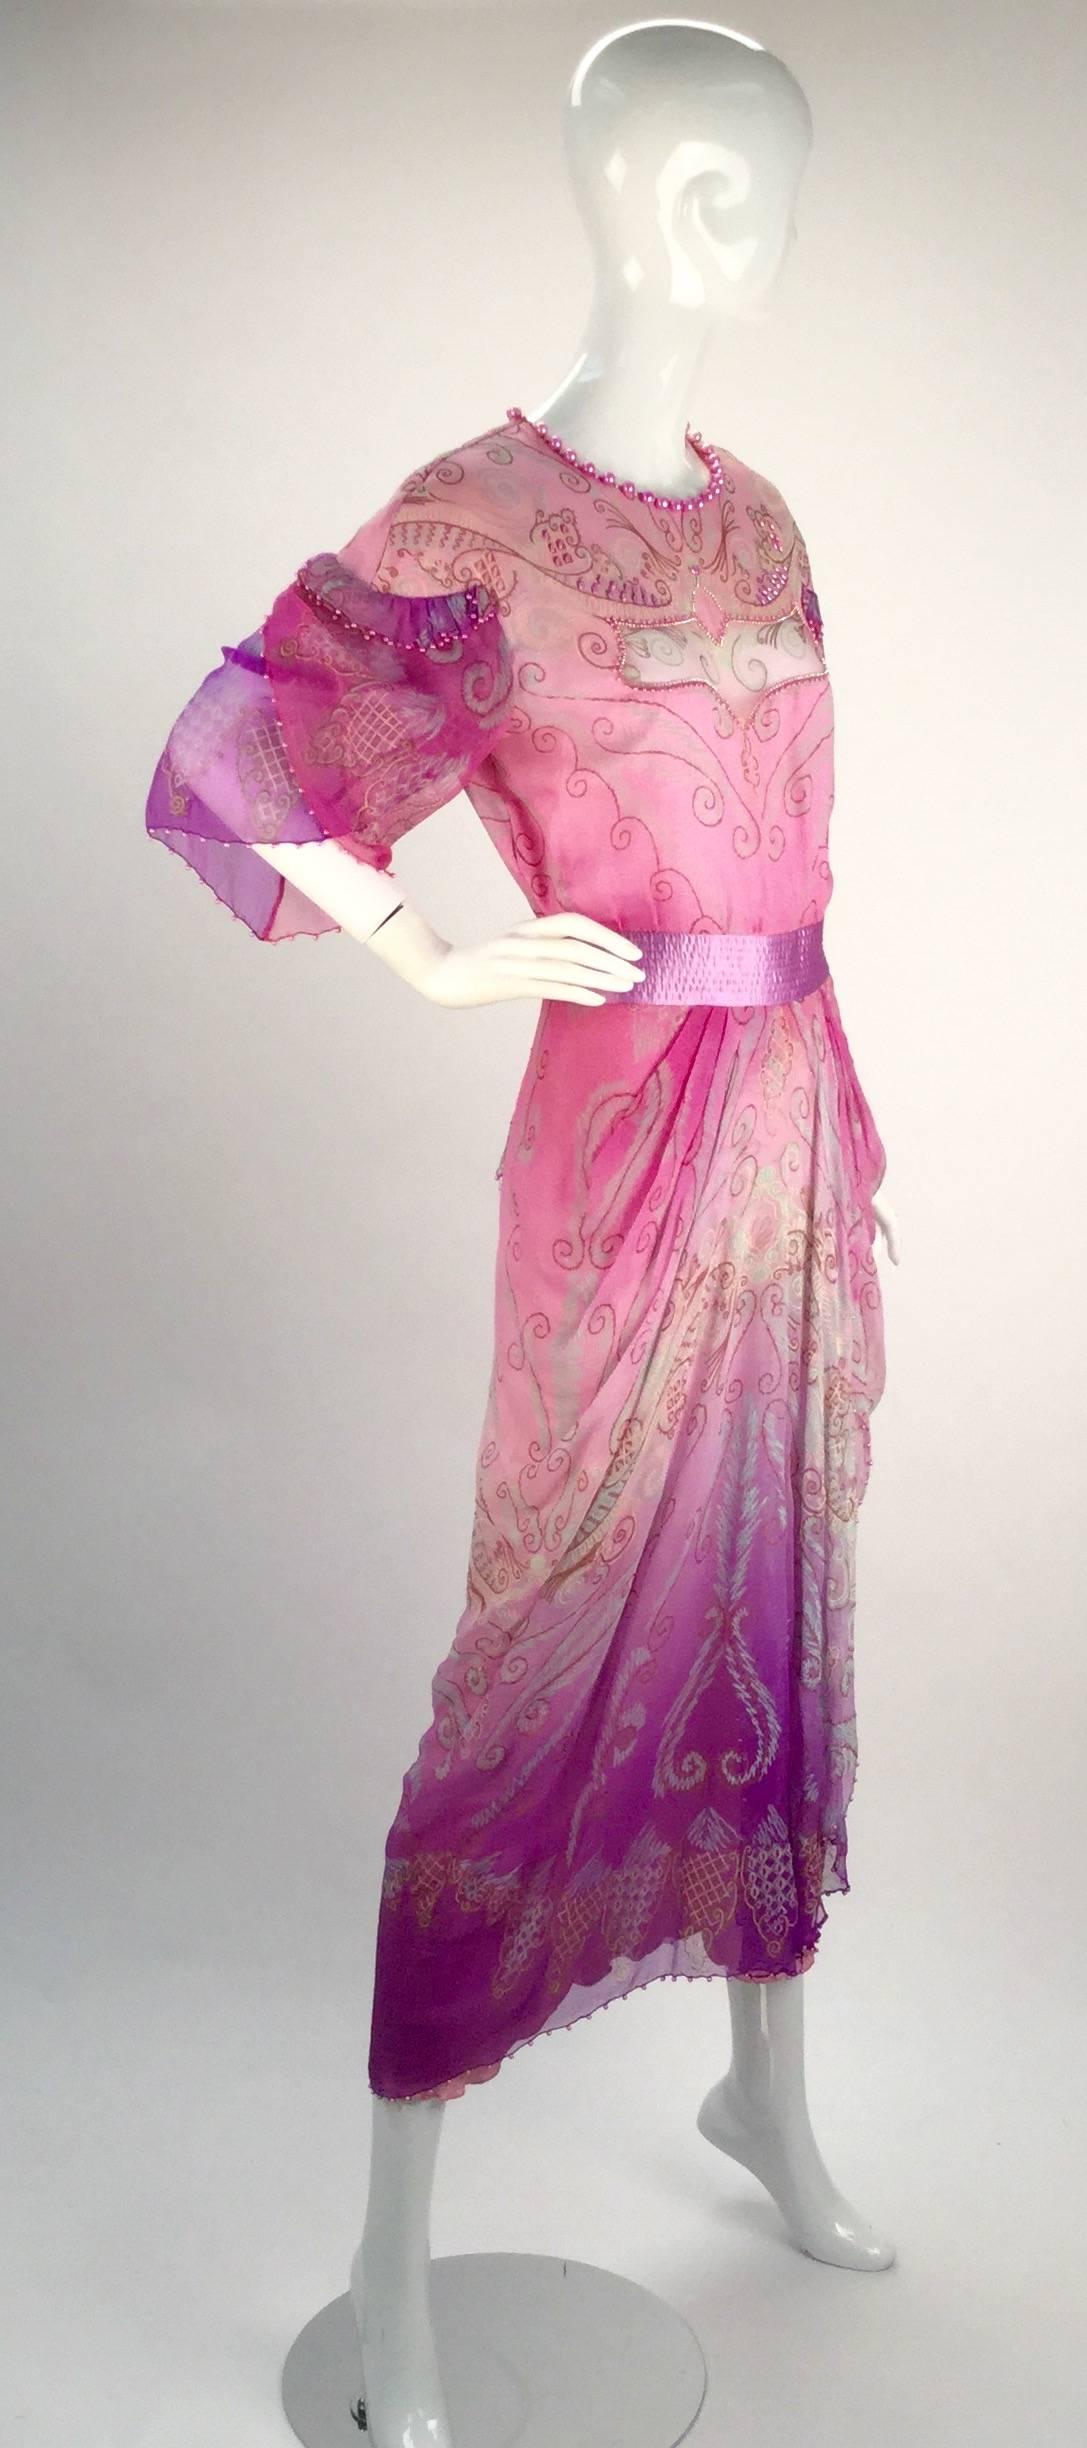 Brilliantly designed and silk screened in the 1970s, comes Zandra Rhodes multicolor pink evening gown. Delicate and beautiful.

We are amazed by how she does it by using both her referential genius and her love of textile and paint.  

The